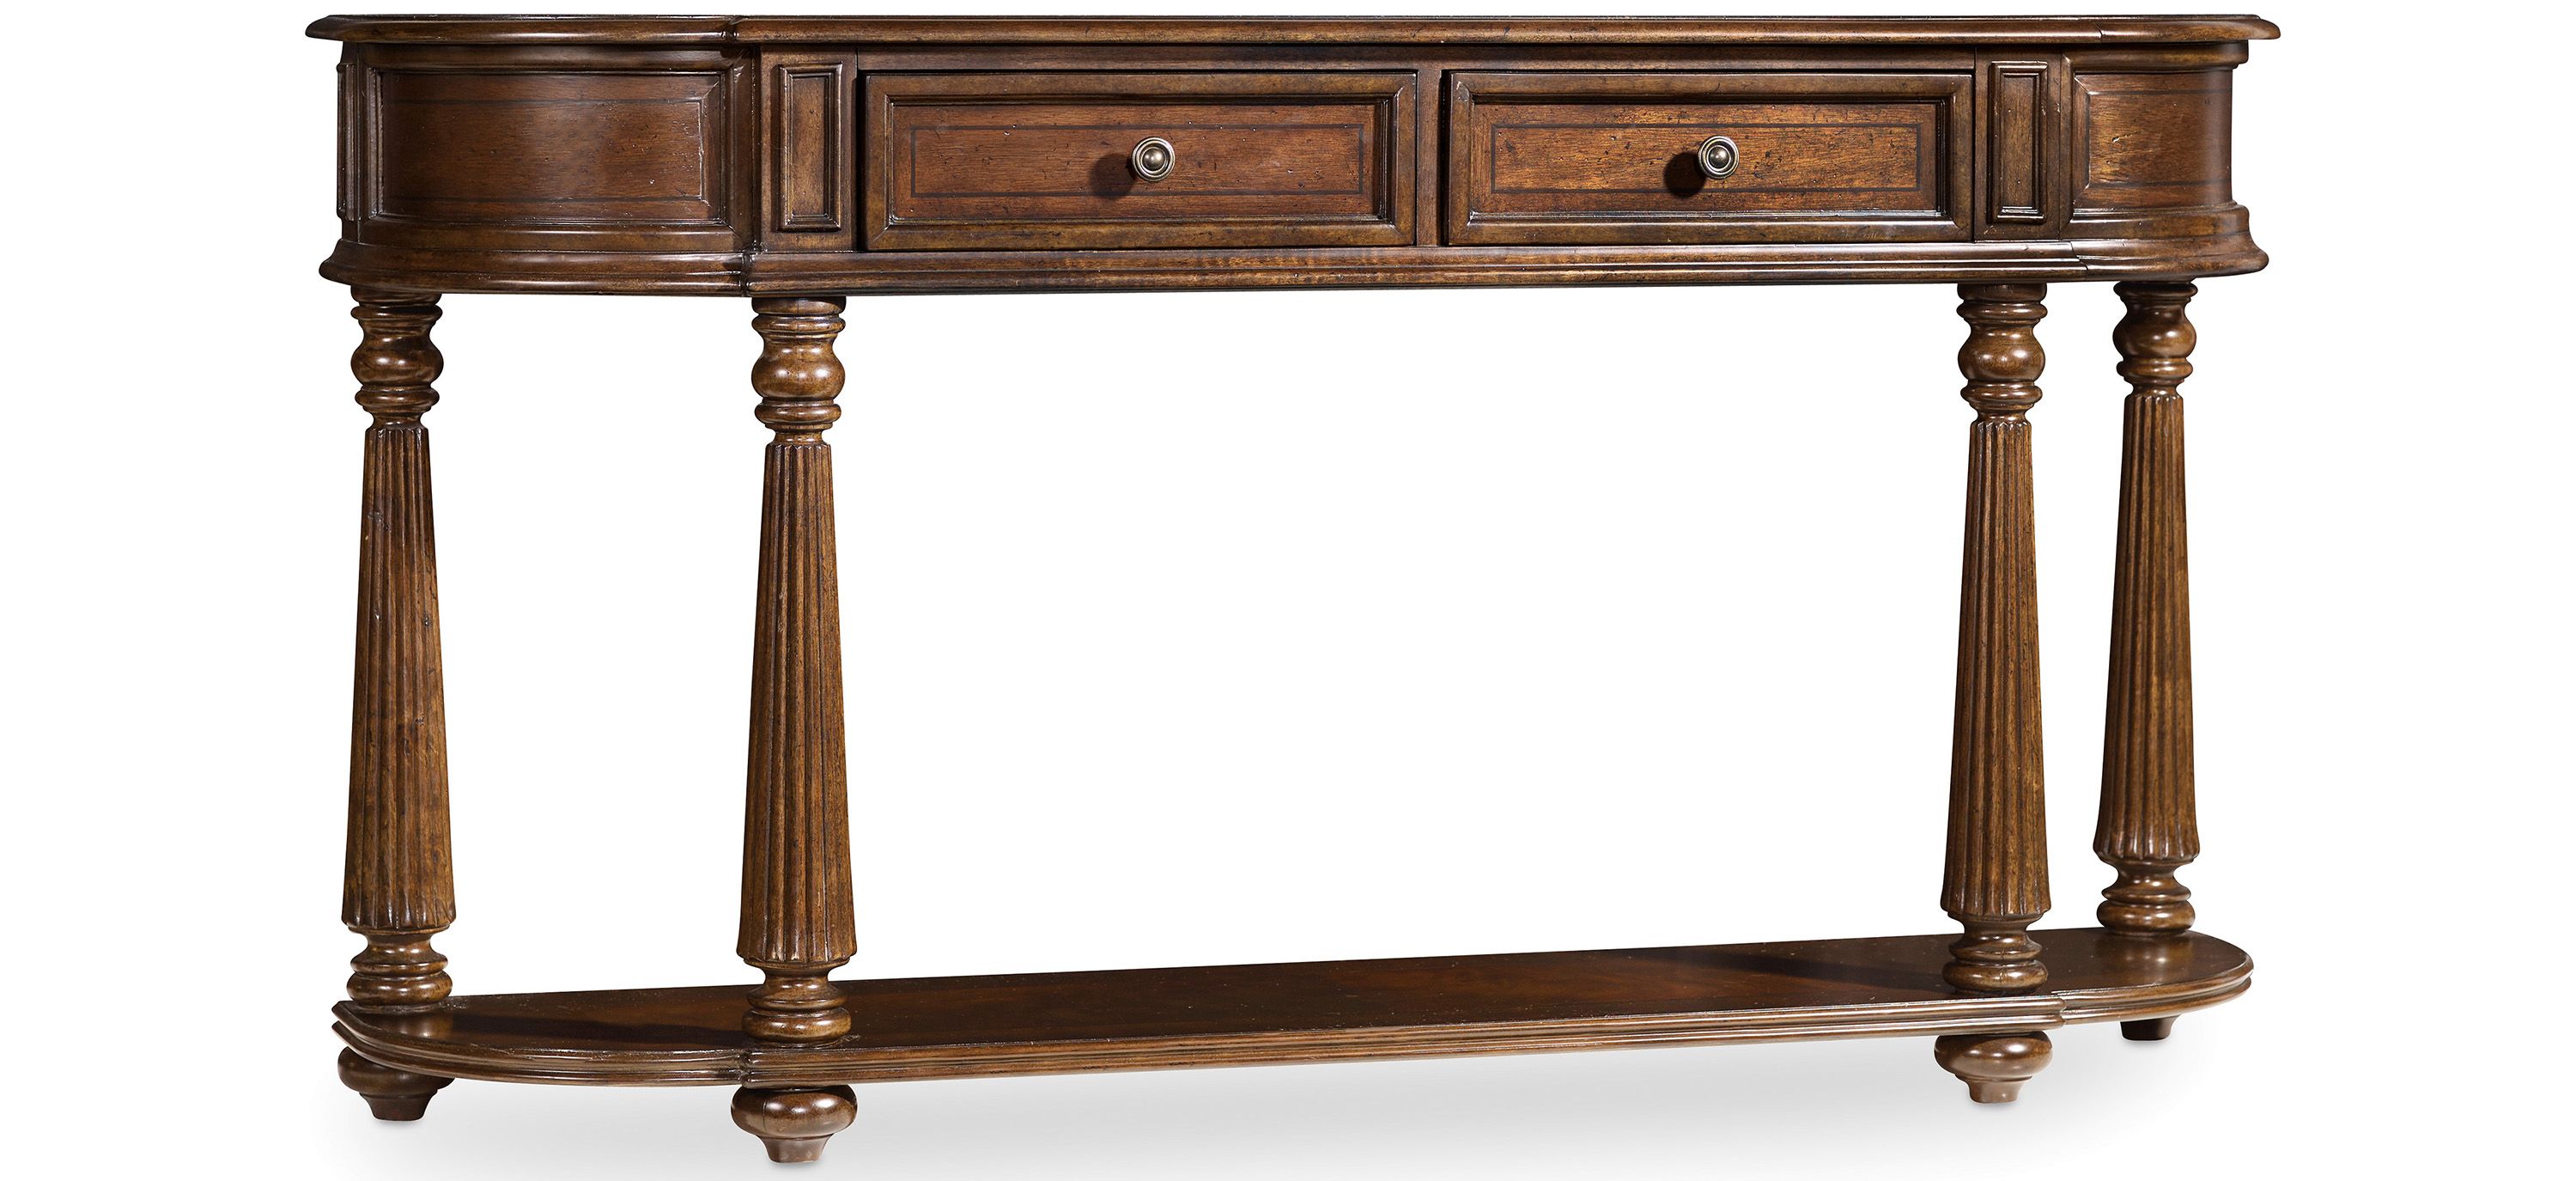 Leesburg Demilune Hall Console